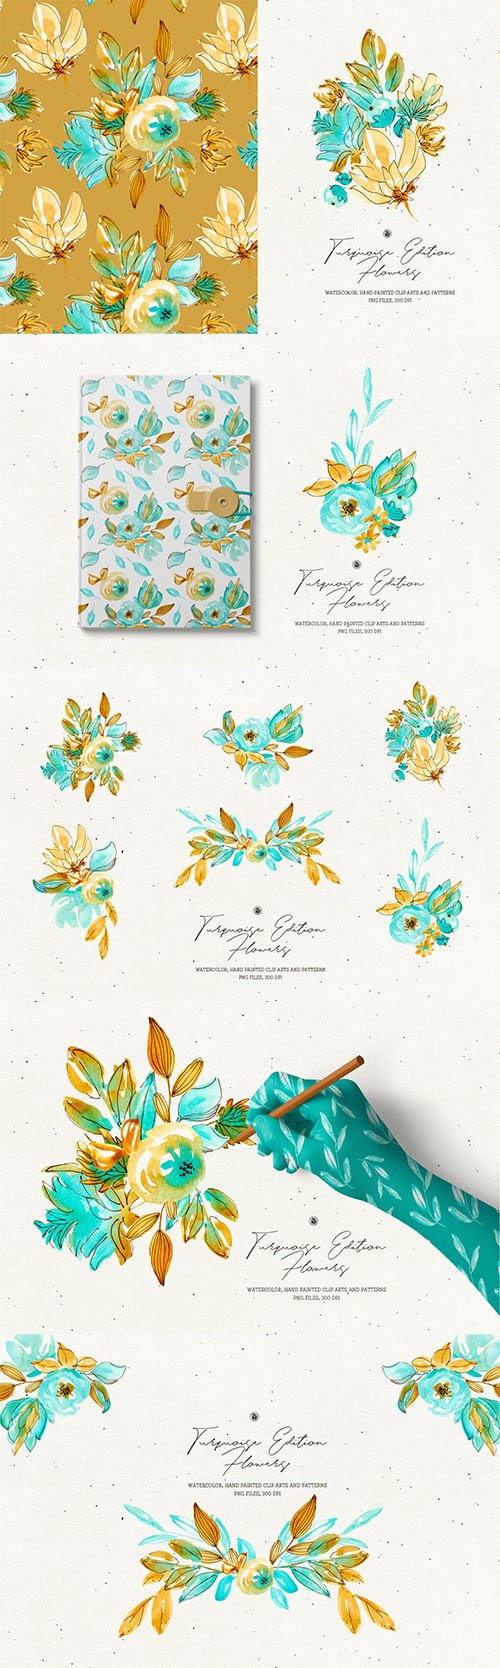 Turquoise Edition Flowers